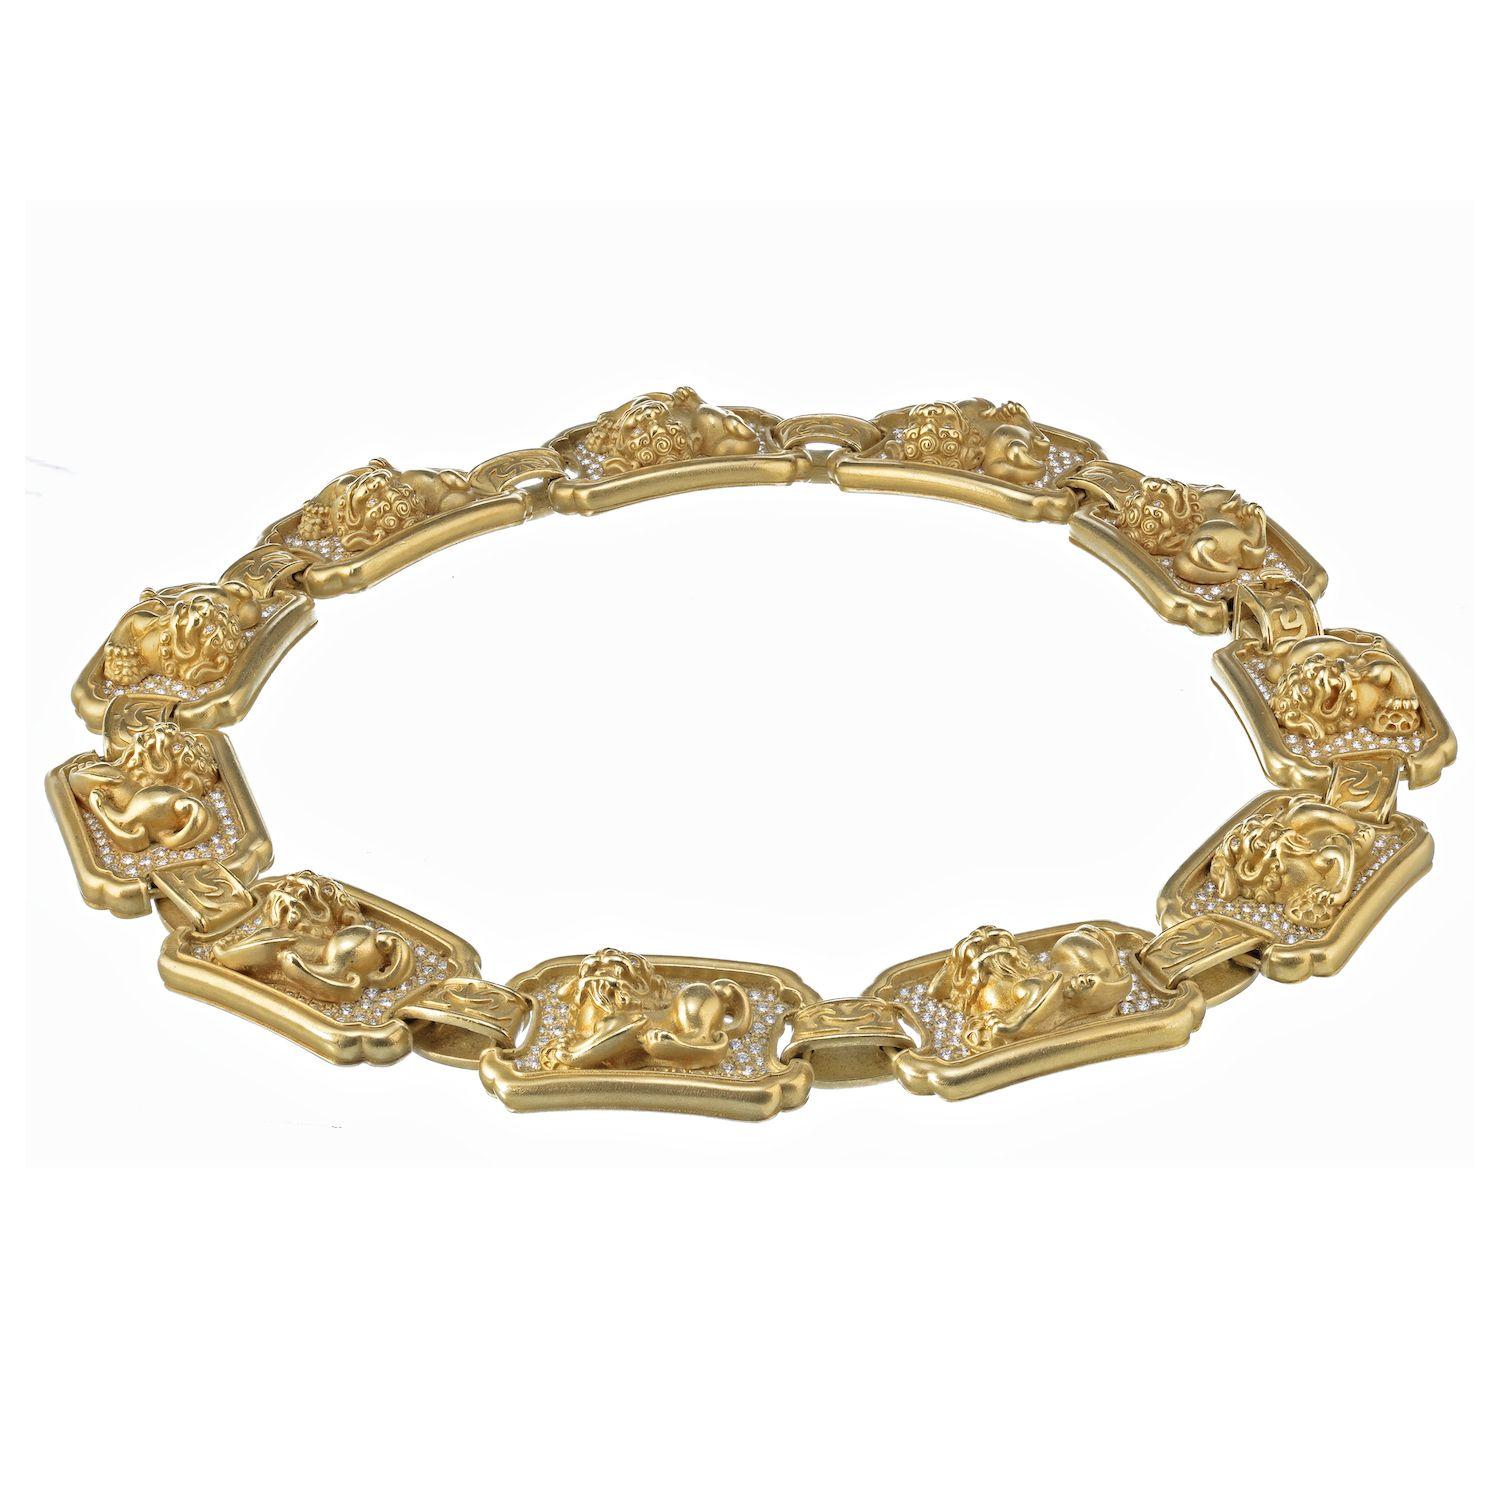 This exquisite necklace was expertly crafted by renowned designer Barry Kieselstein-Cord, and was finely crafted of solid 18k yellow gold. The necklace is comprised of eleven gold panels which are decorated with ornate high relief foo dogs against